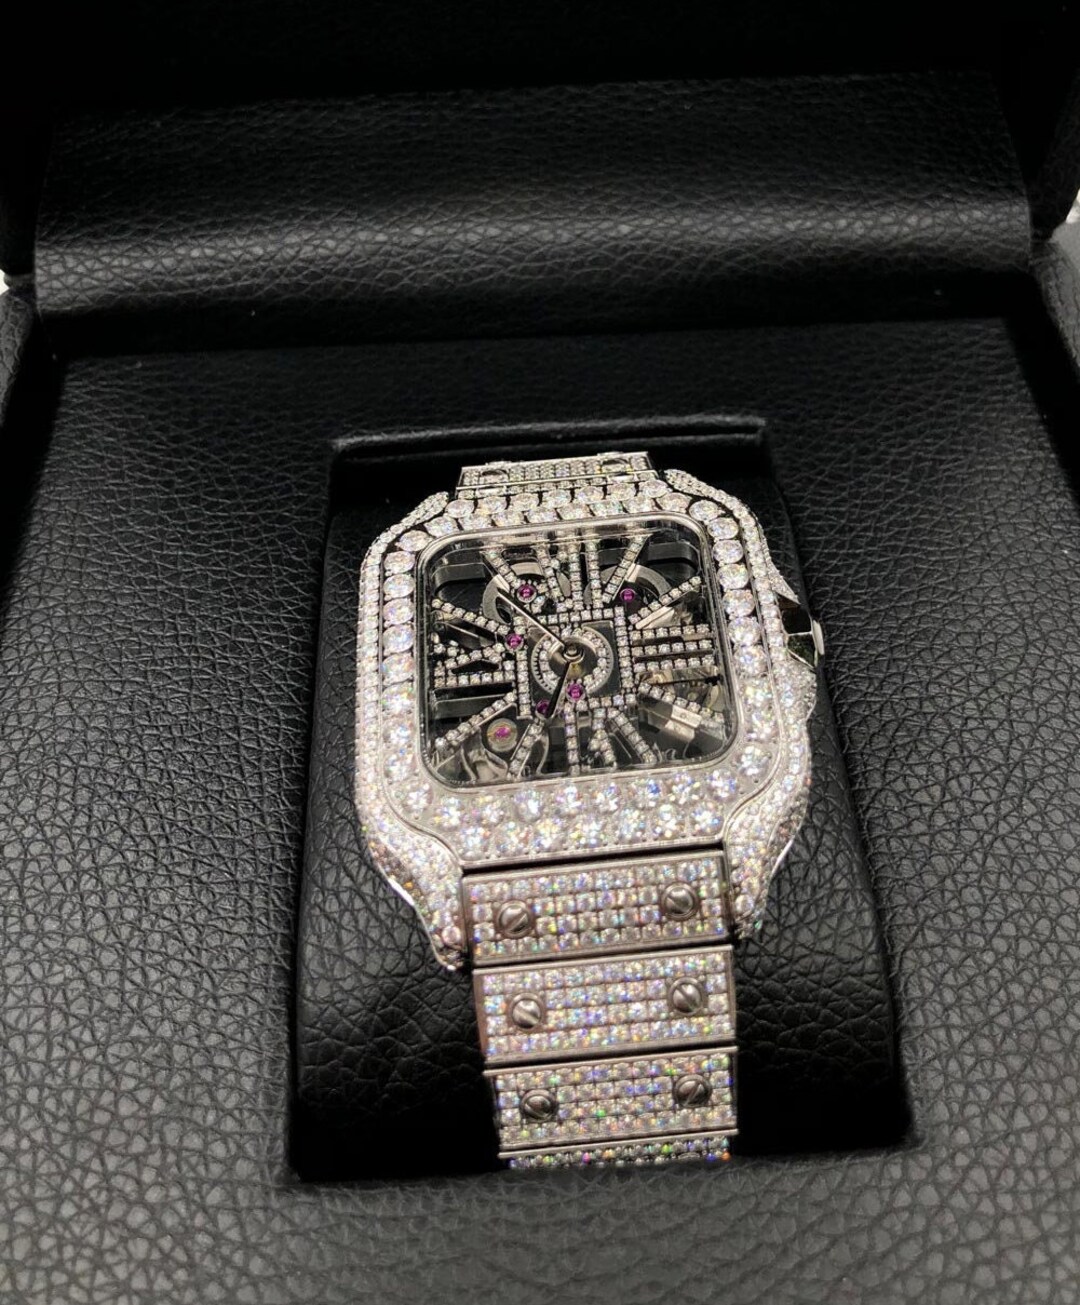 Fully Iced Out VVS Moissanite Diamond Automatic Movement Watch Burst ...